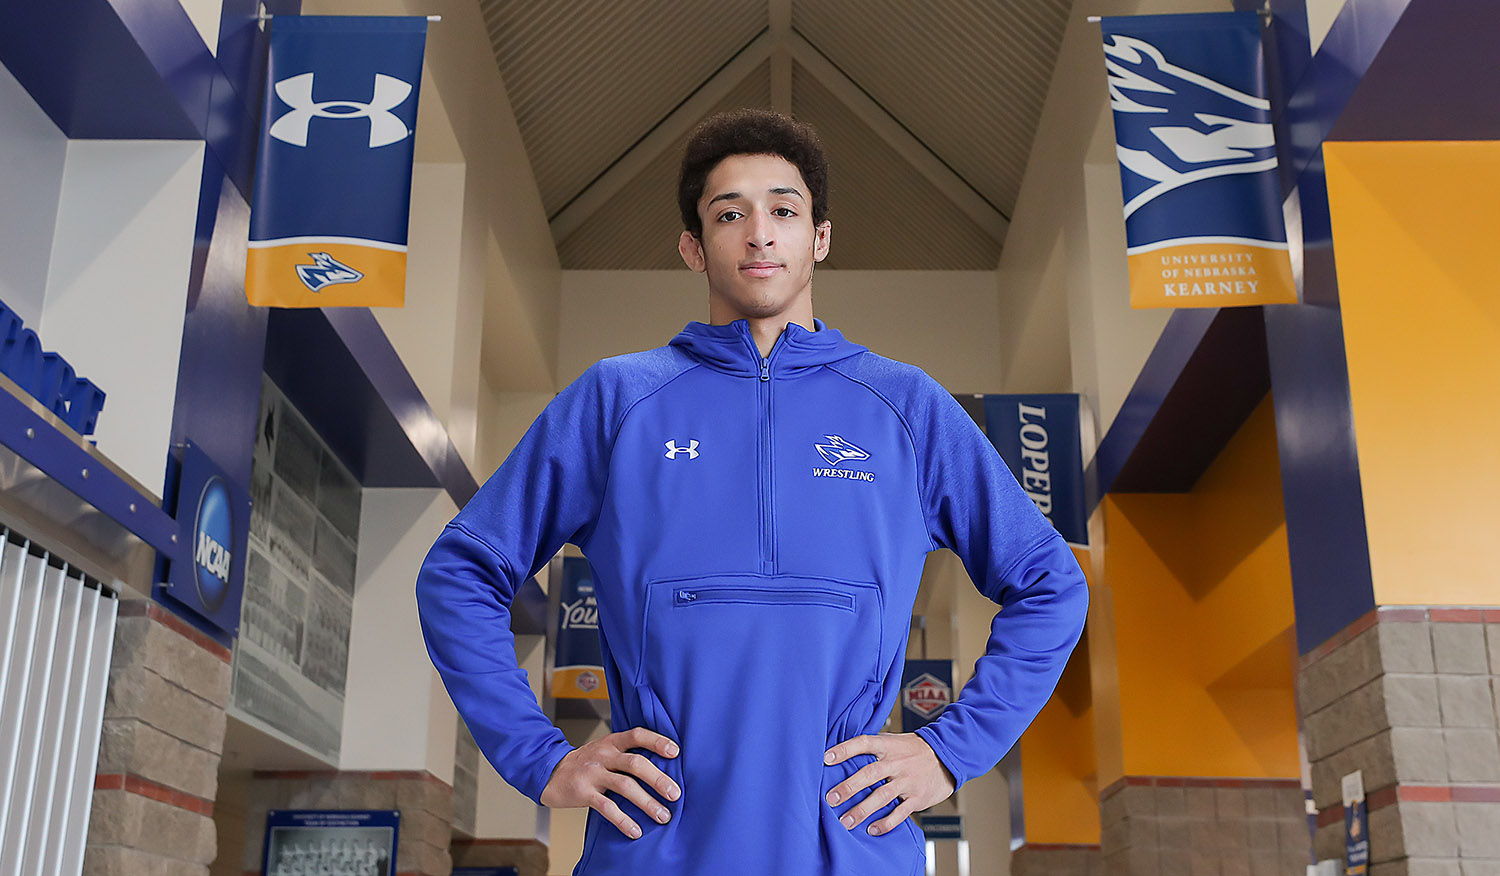 Wesley Dawkins came to UNK with one goal in mind – win a national championship. “The goal is always the same,” he said. “That’s part of the reason why I love being on this team.” (Photo by Erika Pritchard, UNK Communications)